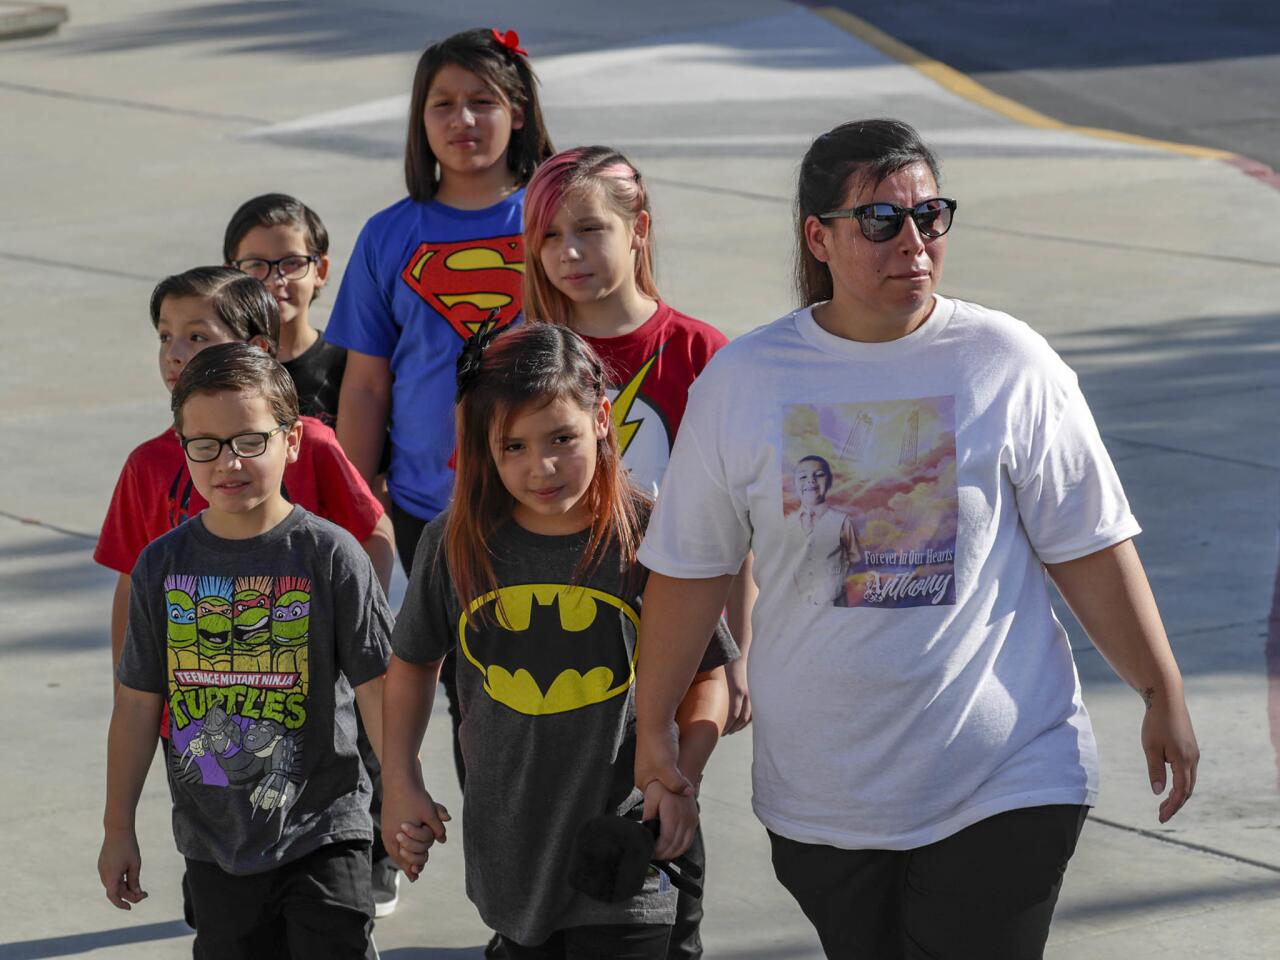 Memorial service for 10-year-old Anthony Avalos